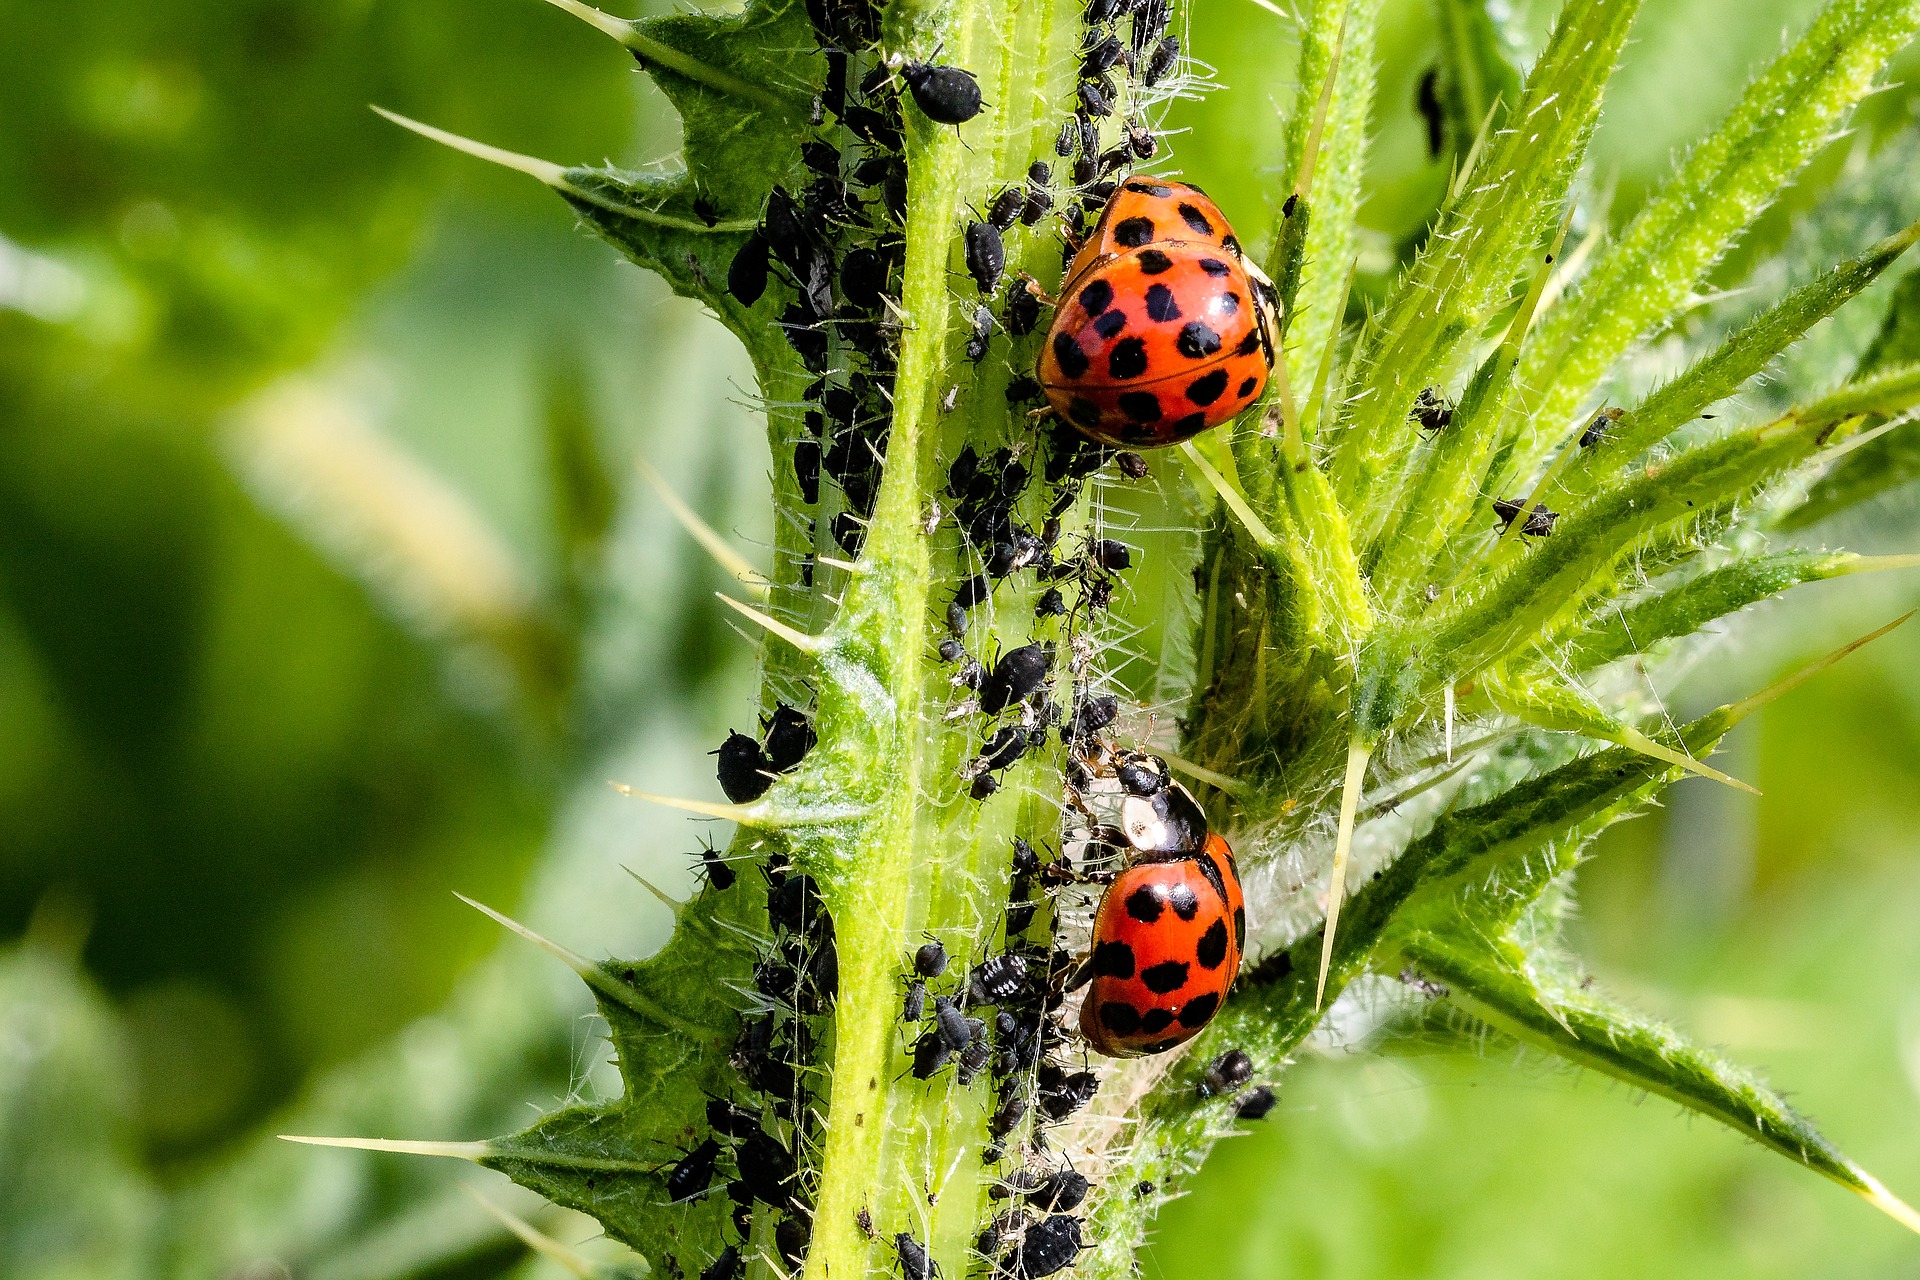 Aphids are notorious for sucking the life out of many plants. If you have a backyard garden, take note of these natural ways to get rid of aphids.